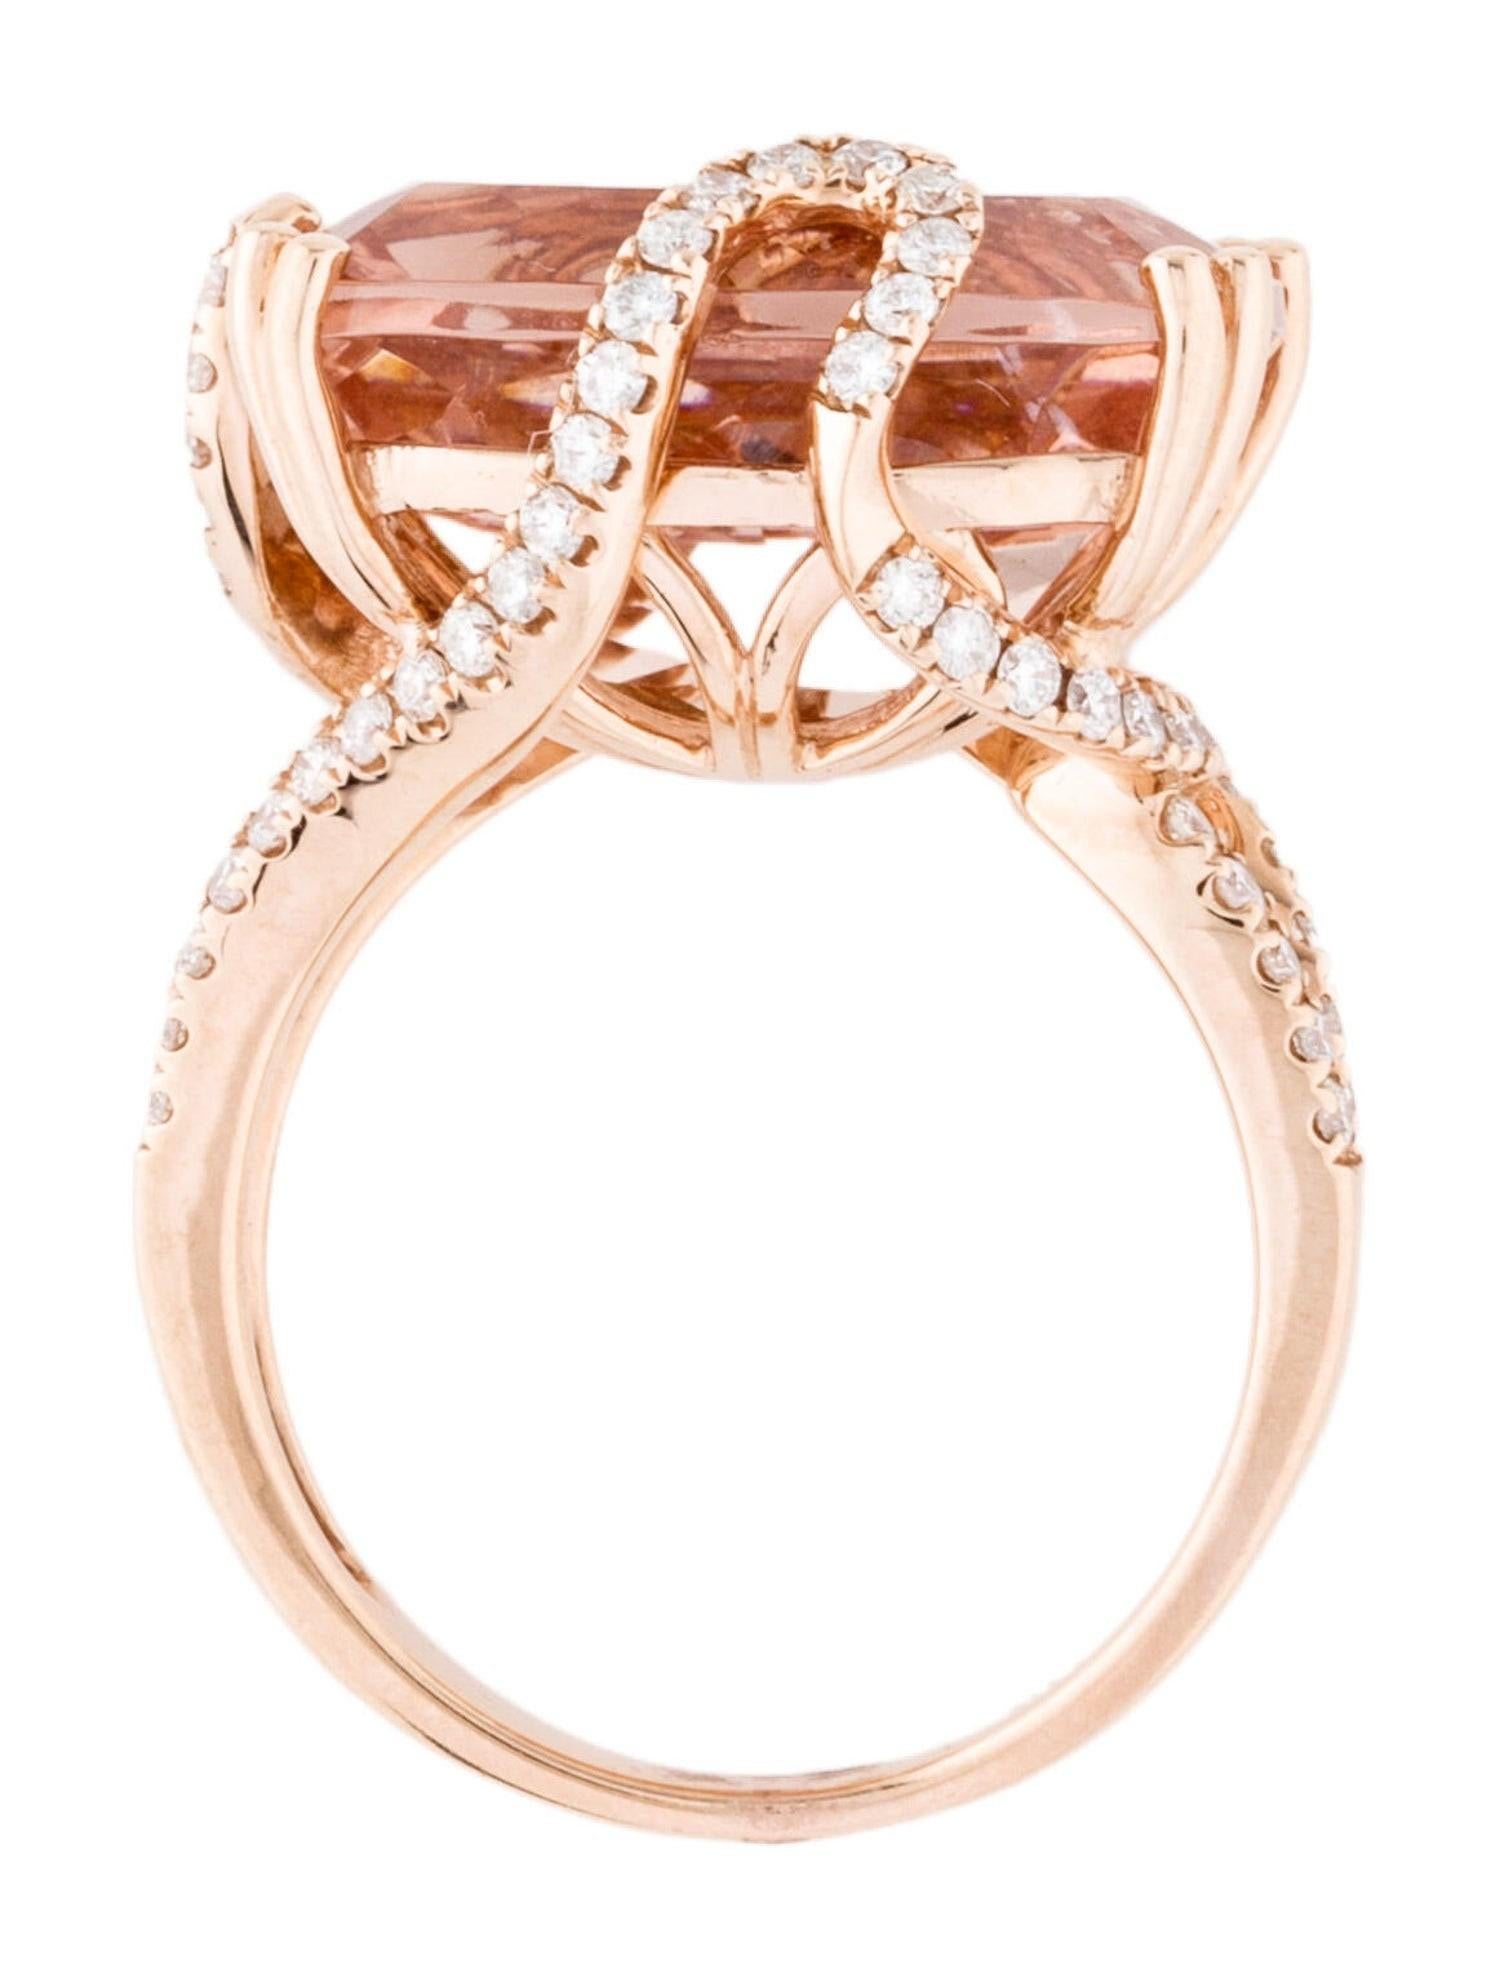 The Rose Gold 12.3 Ct Cushion Morganite Diamond Cocktail Ring In New Condition For Sale In New York, NY